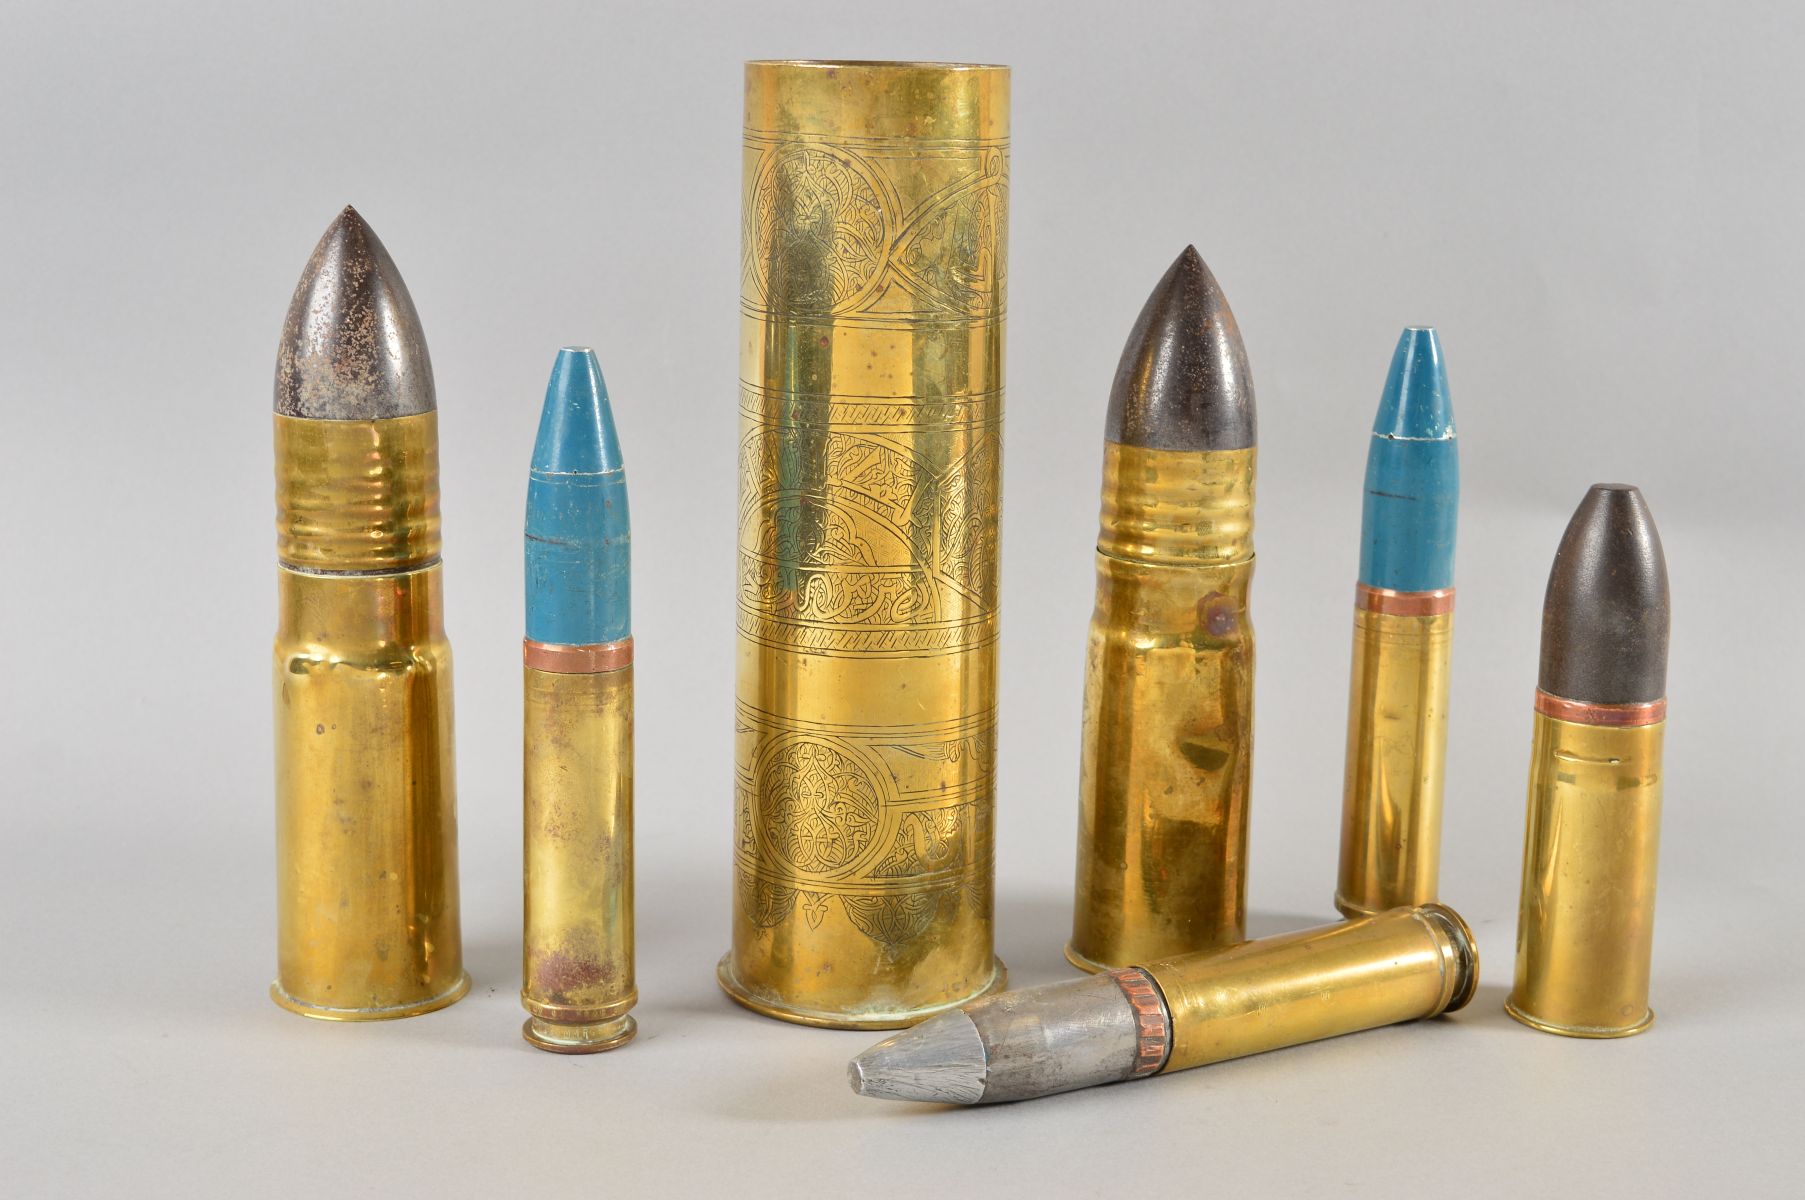 A BOX CONTAINING SIX MILITARY SHELLS OF VARIOUS CALIBRES INERT, and a larger shell which has been - Image 2 of 3